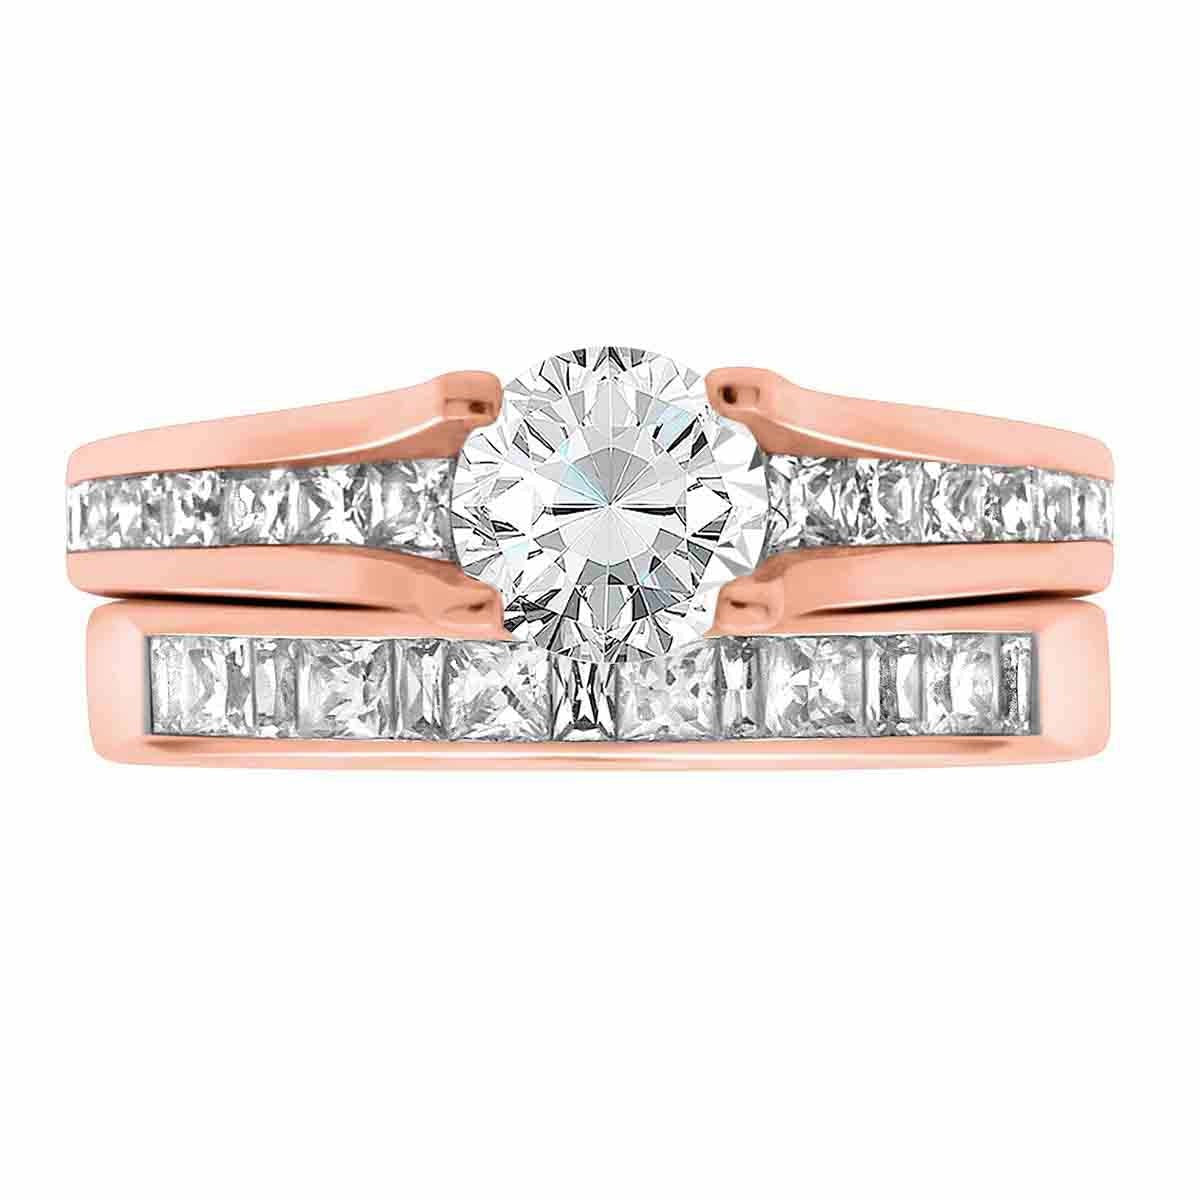 Channel Set Diamond Ring set in rose gold pictured with a diamond wedding ring